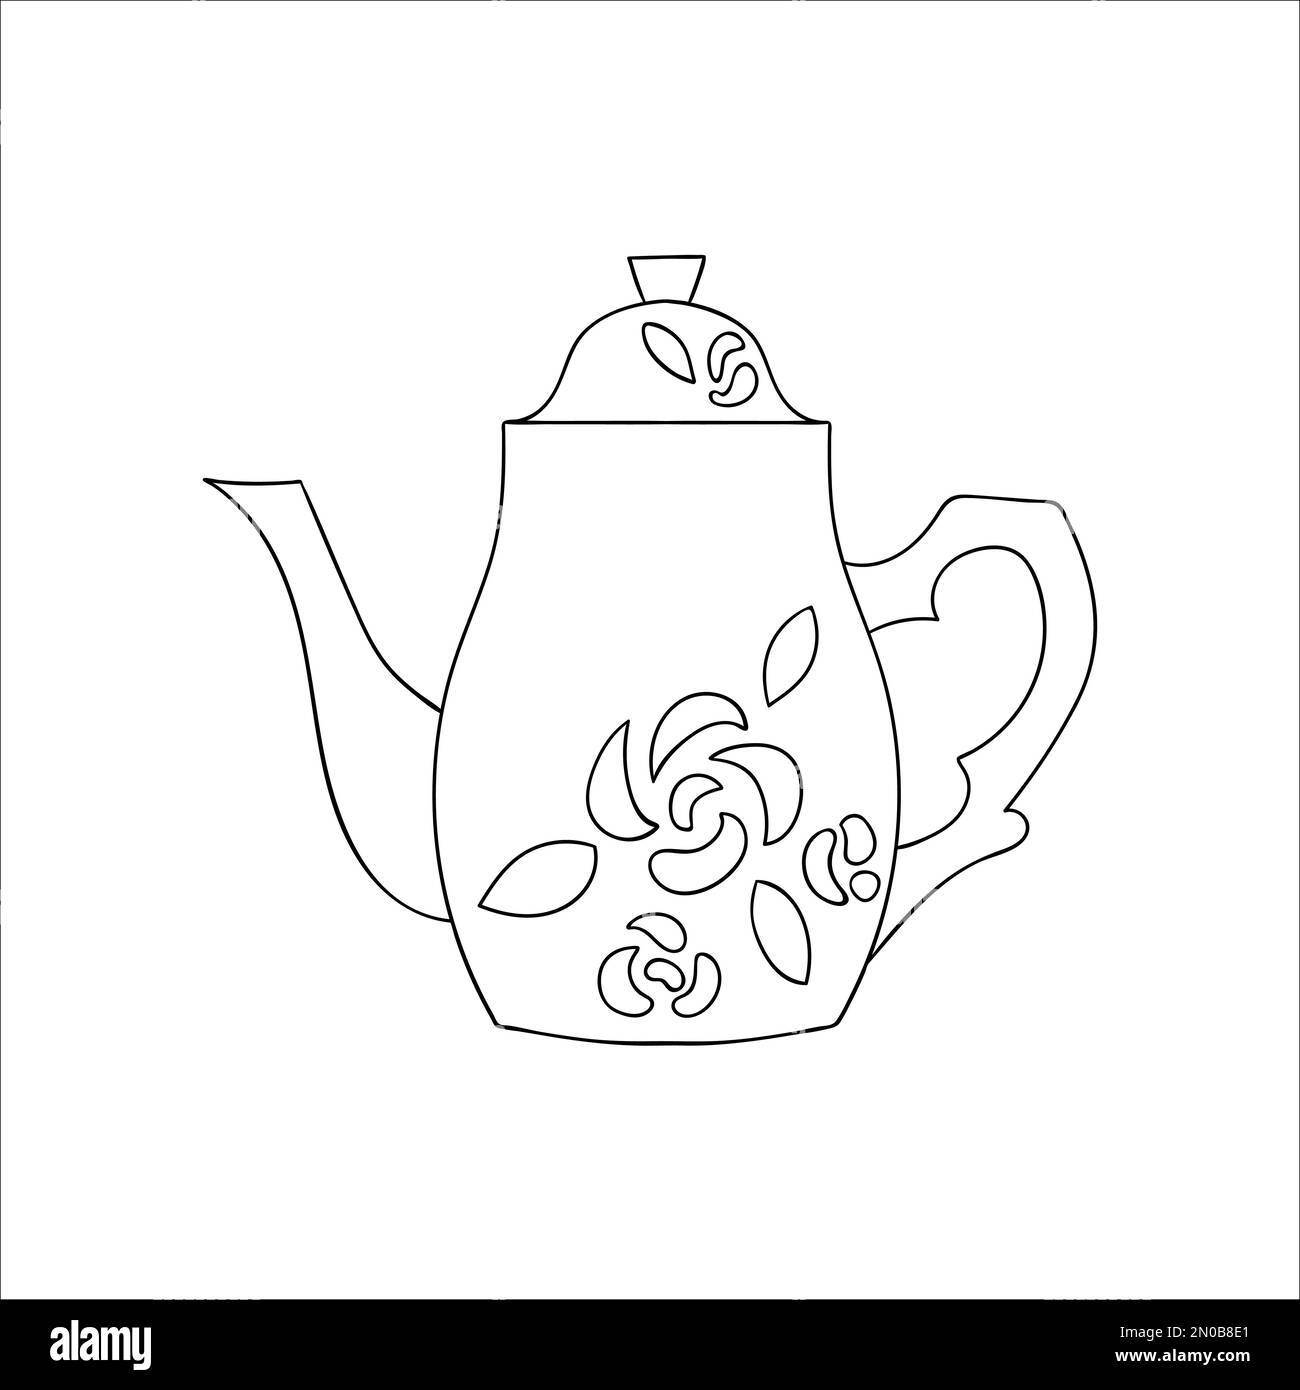 Teapot line icon. Black and white teapot vector illustration. Linear art kettle isolated on white background. Doodle style kitchen equipment Stock Vector